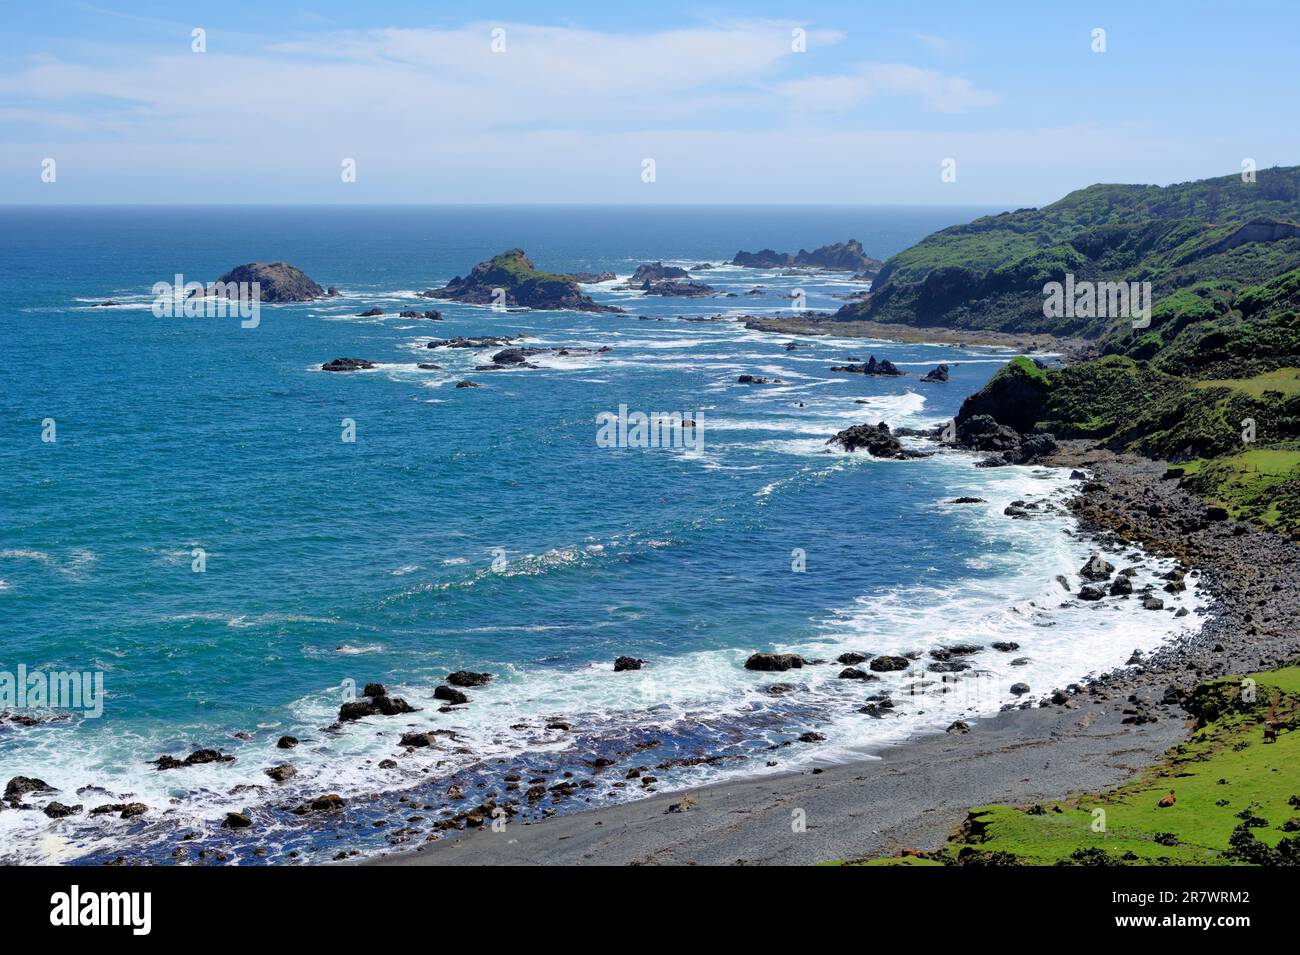 The ocean coast of the island of Chiloe in southern Chile. Stock Photo